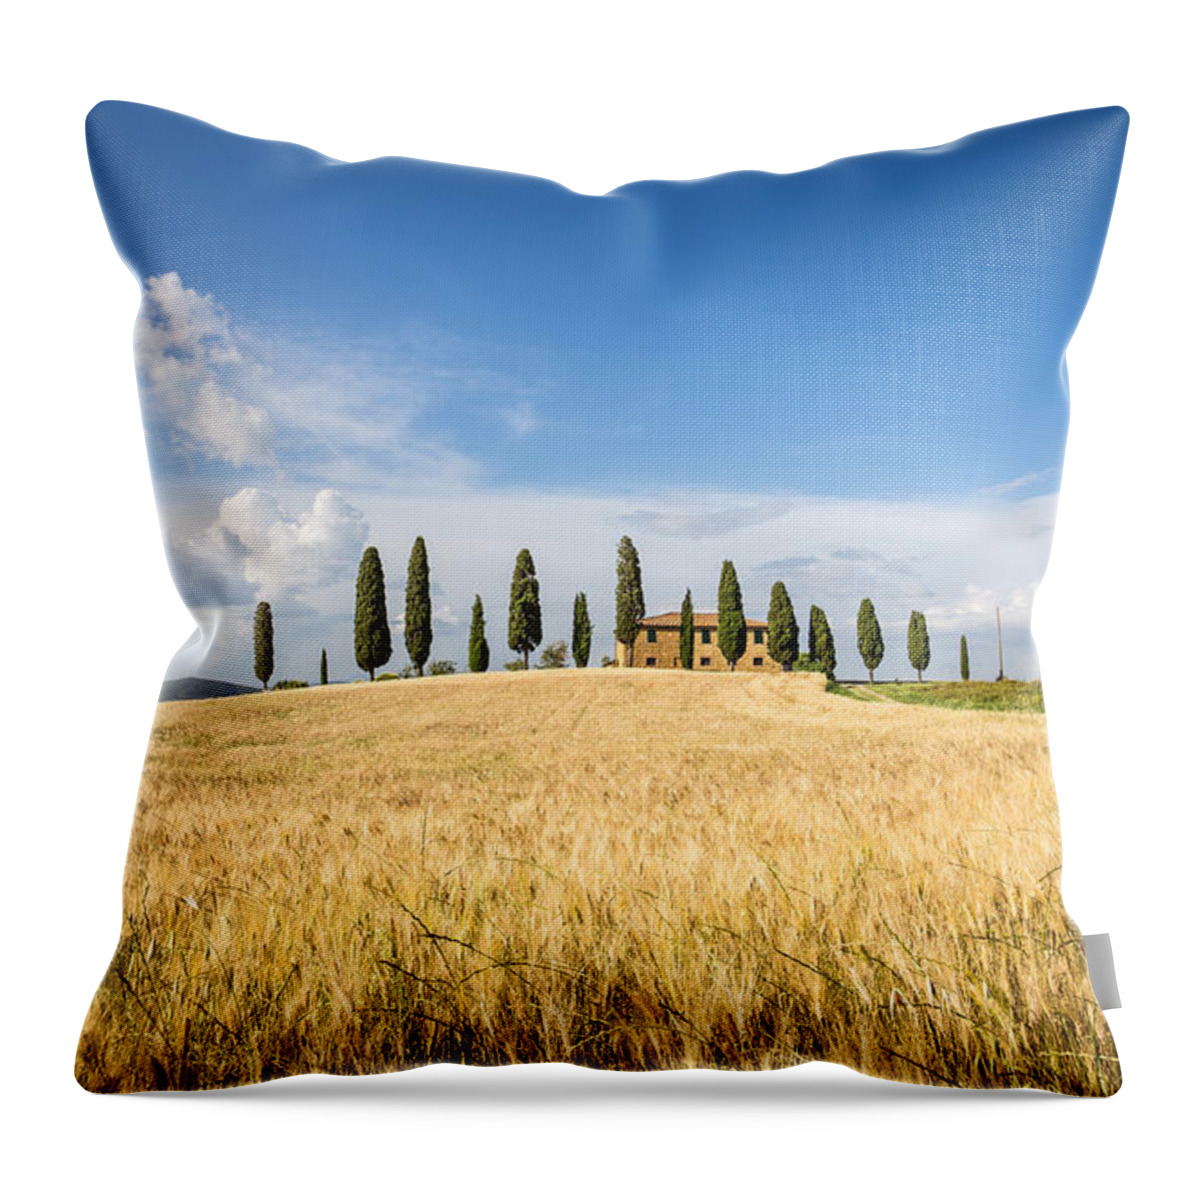 Center Italy Throw Pillow featuring the photograph Tuscan Villa #1 by Stefano Termanini